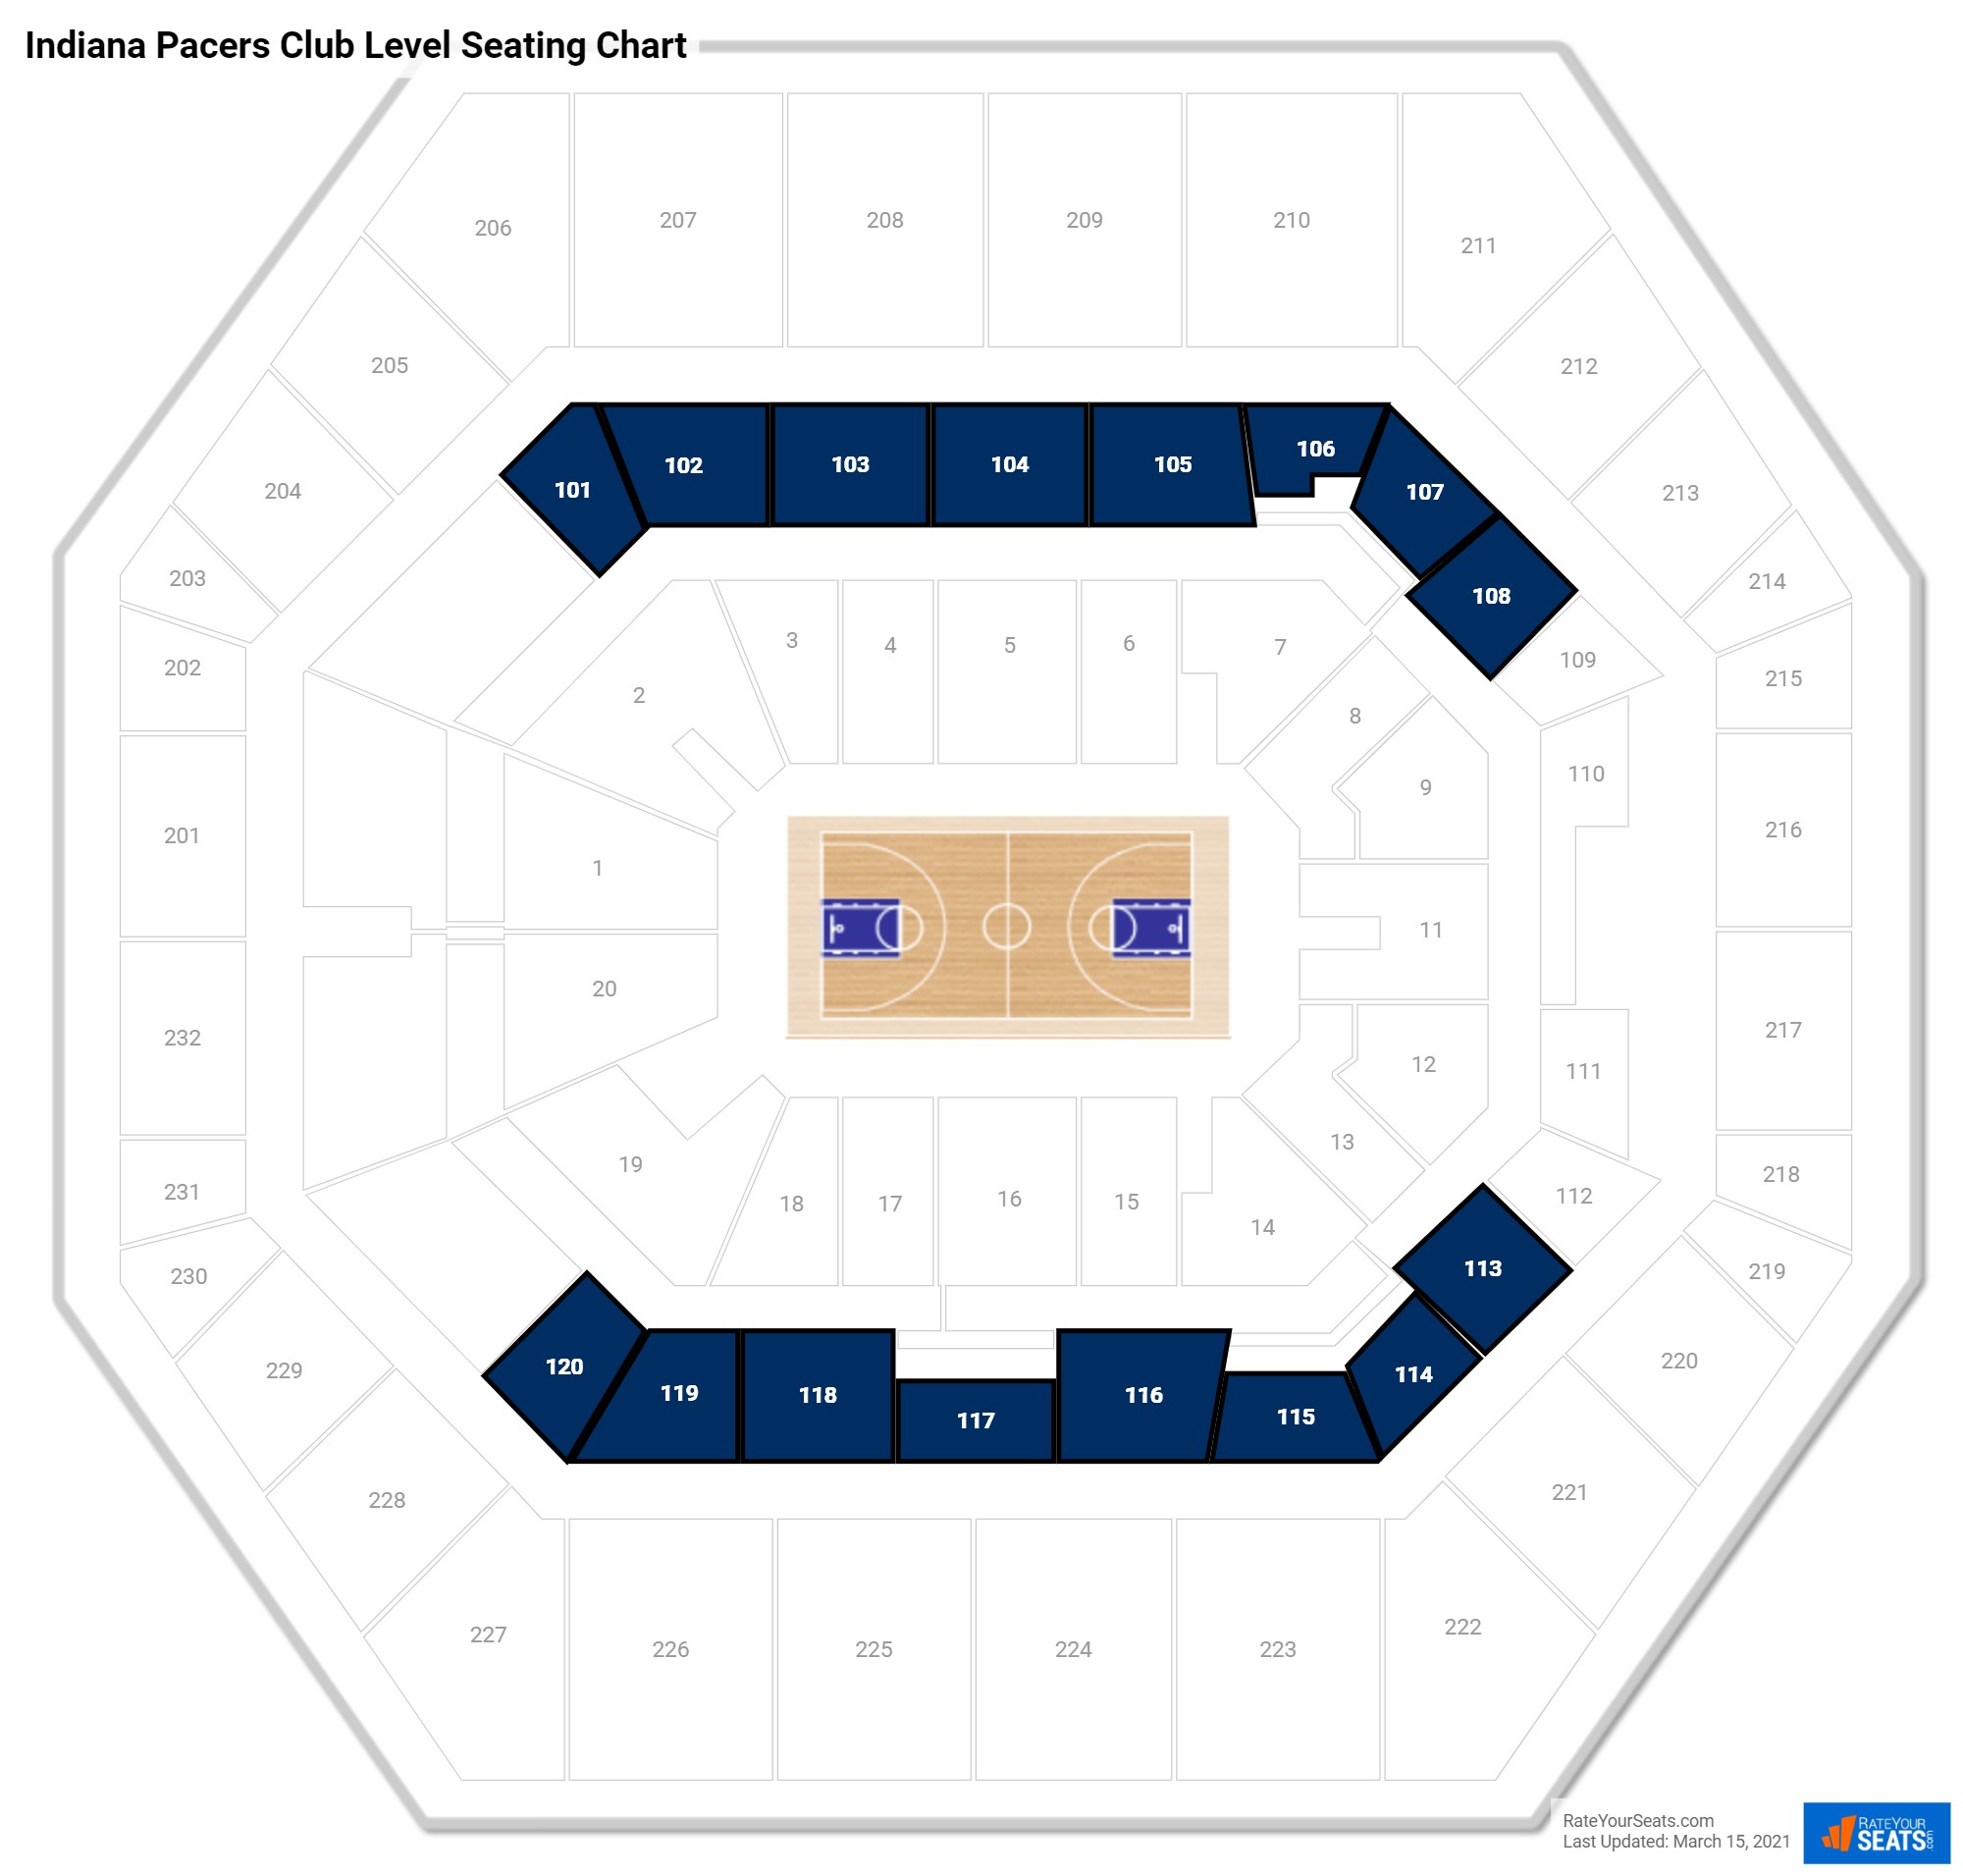 Fieldhouse Seating Chart